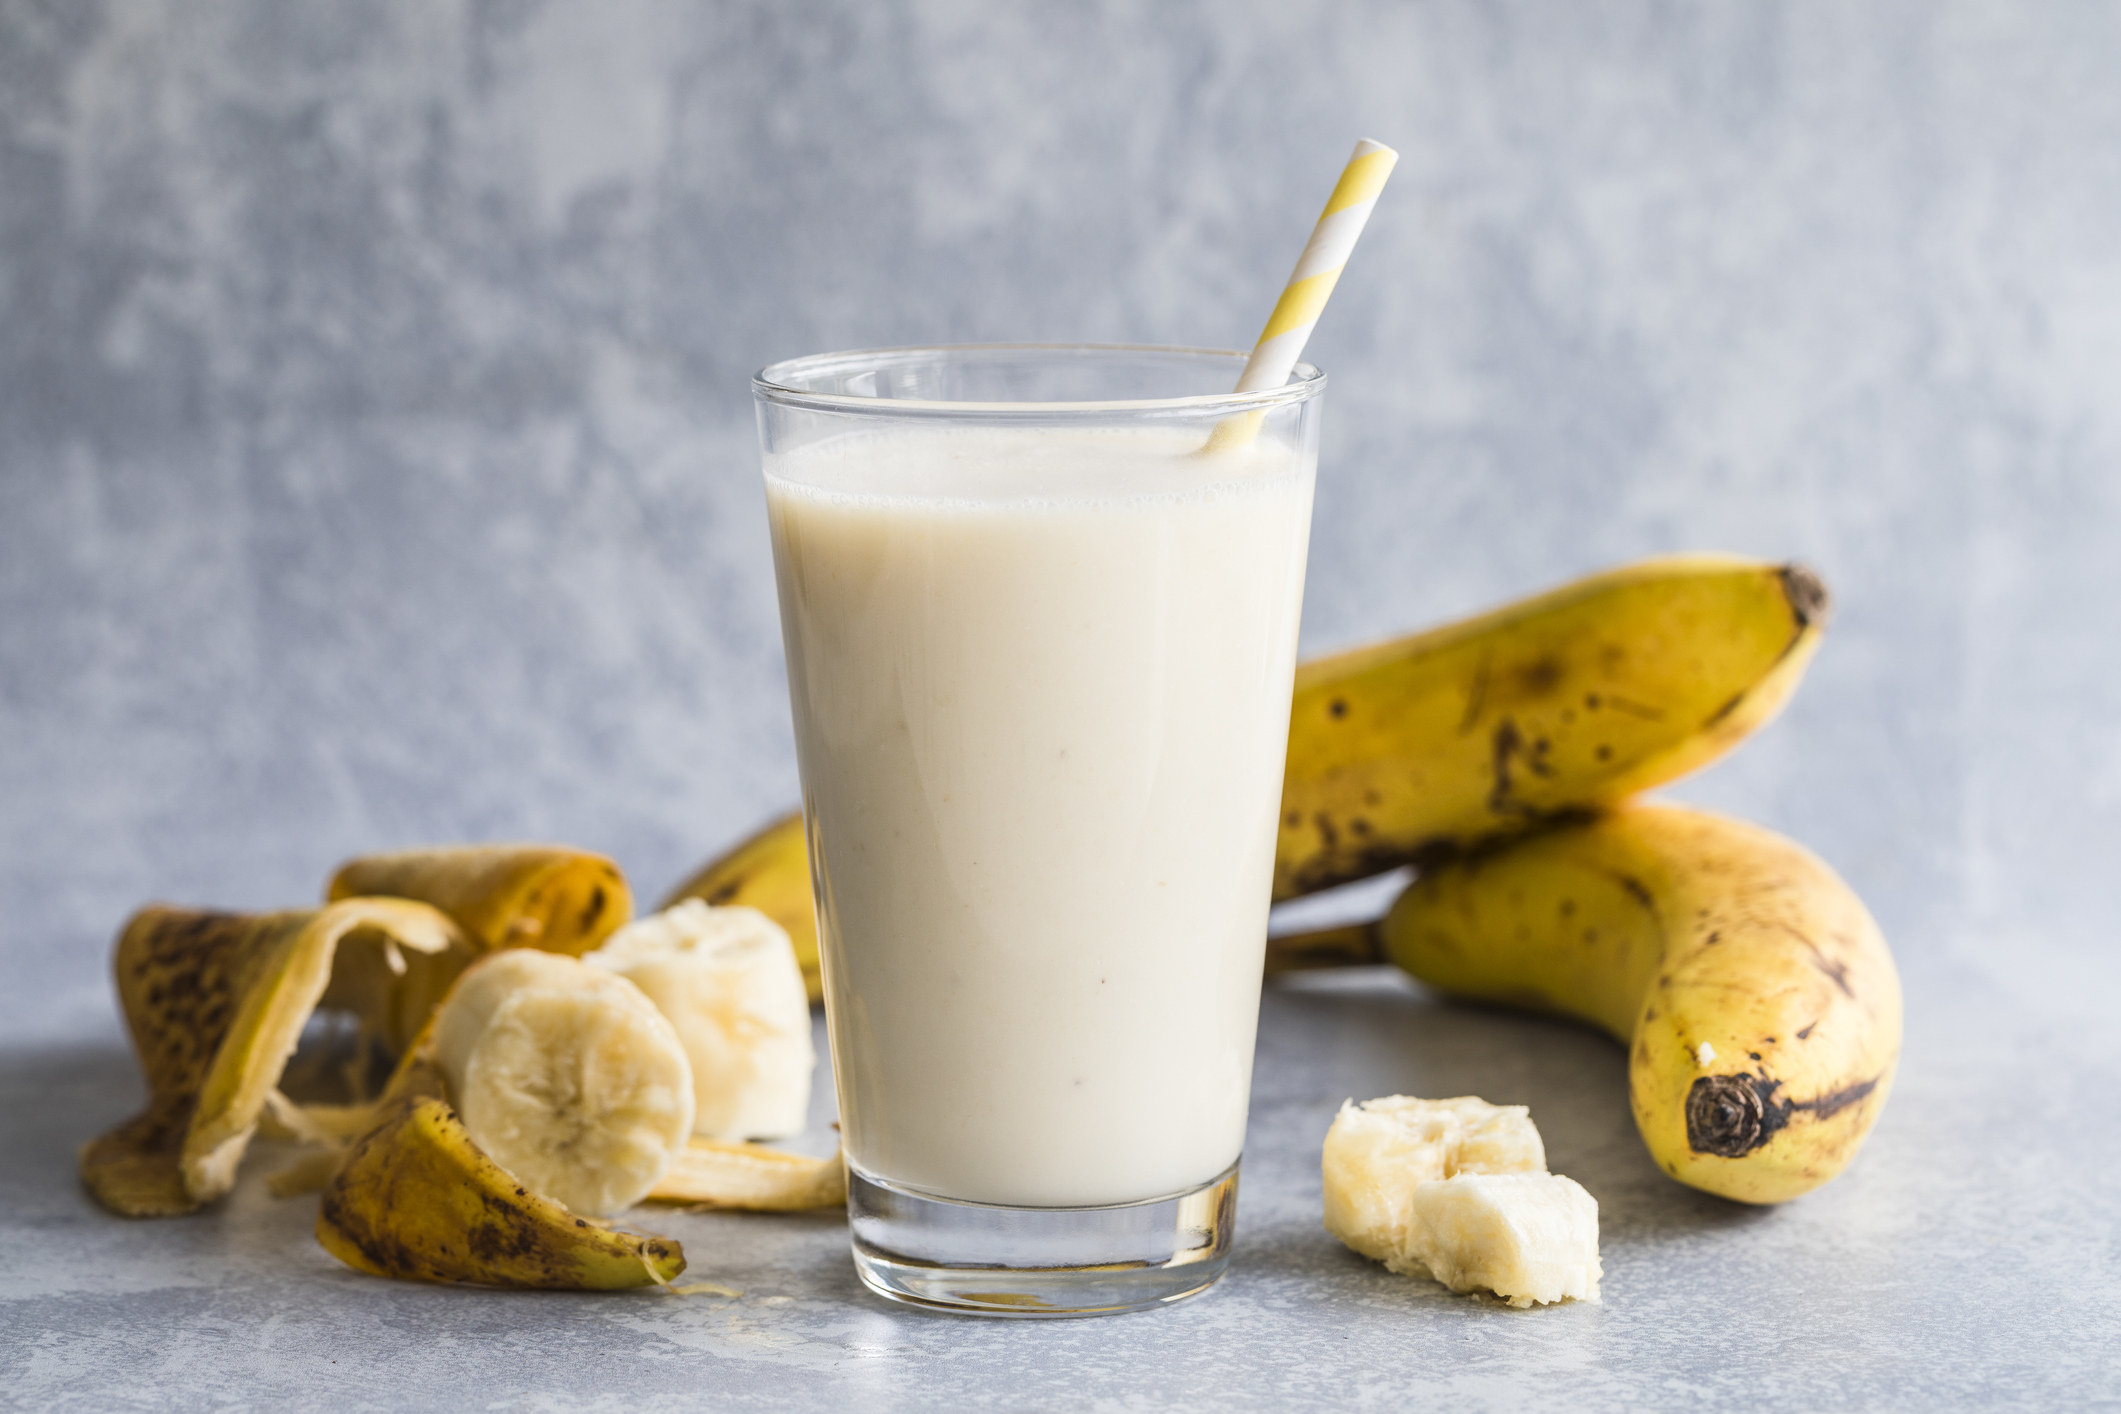 A banana smoothie and bananas in the background.